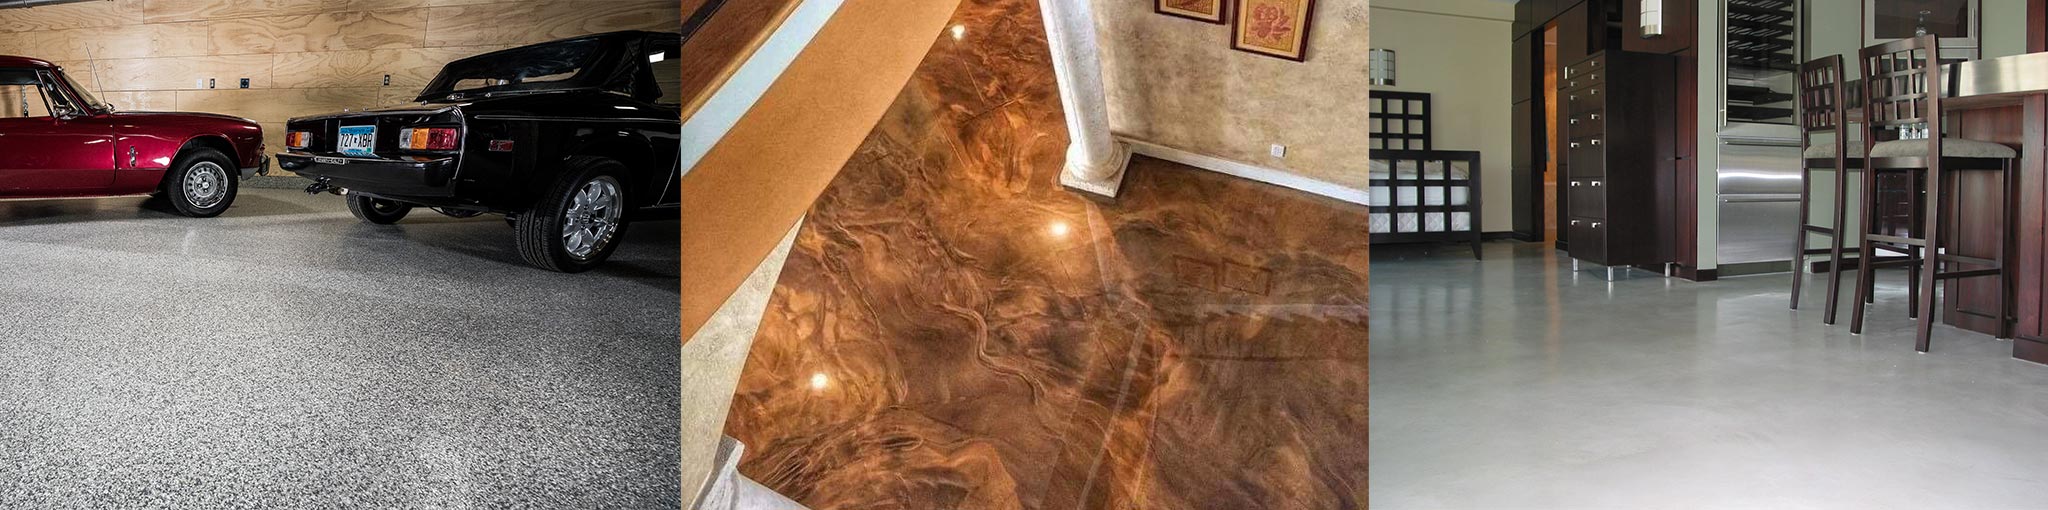 DIY Residential Concrete Floor Kits Garage Kitchen Entrance all living areasnbspDIY Residential Flooring | Metallic Epoxy| Polished Concrete | Duraamen Engineered Products Inc